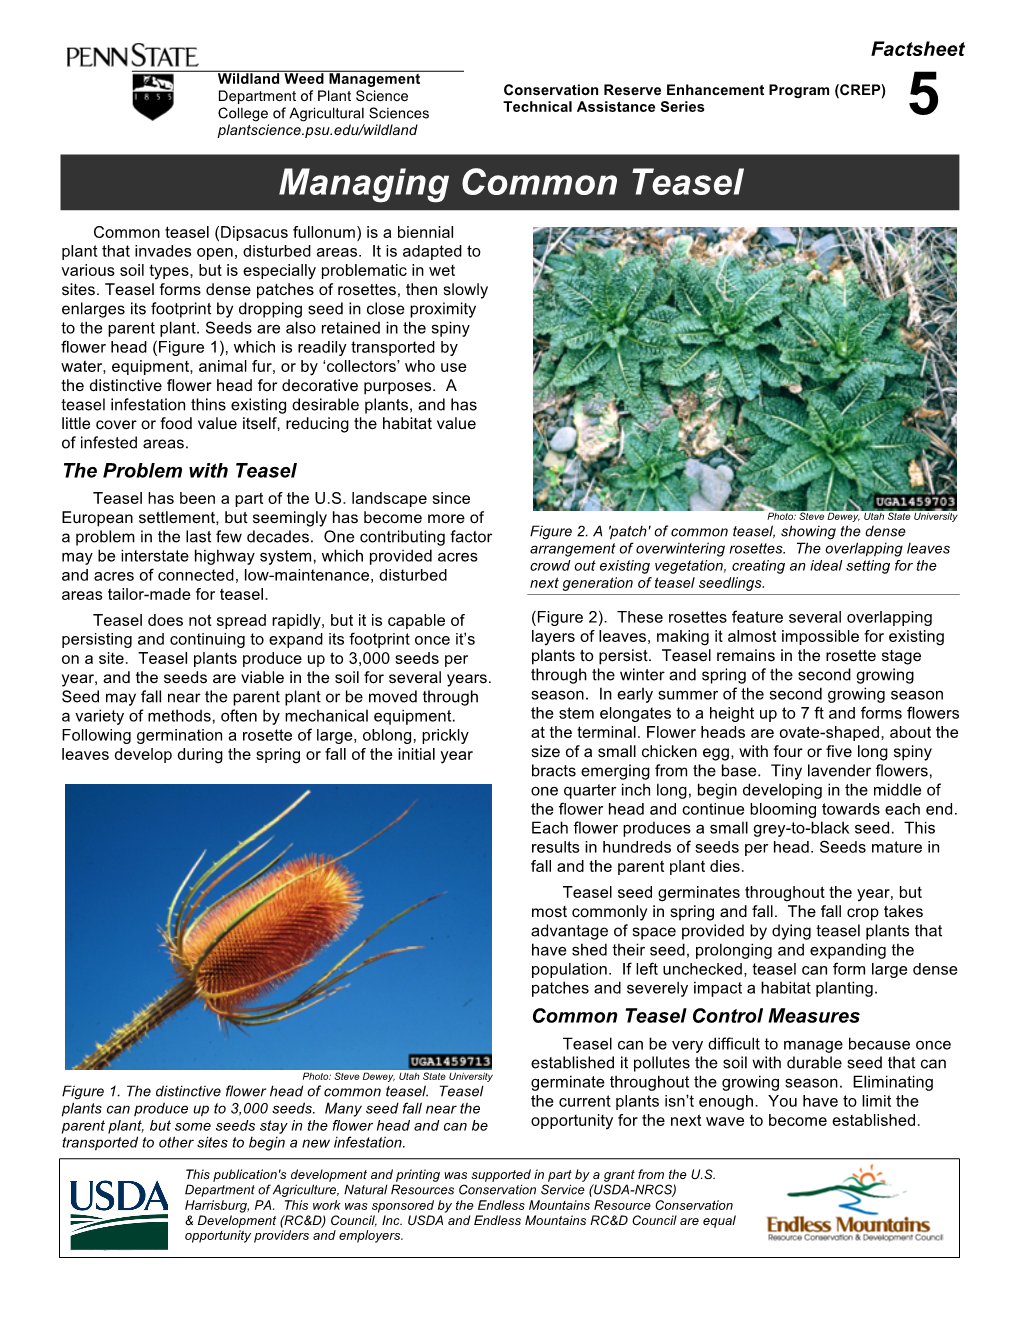 Managing Common Teasel